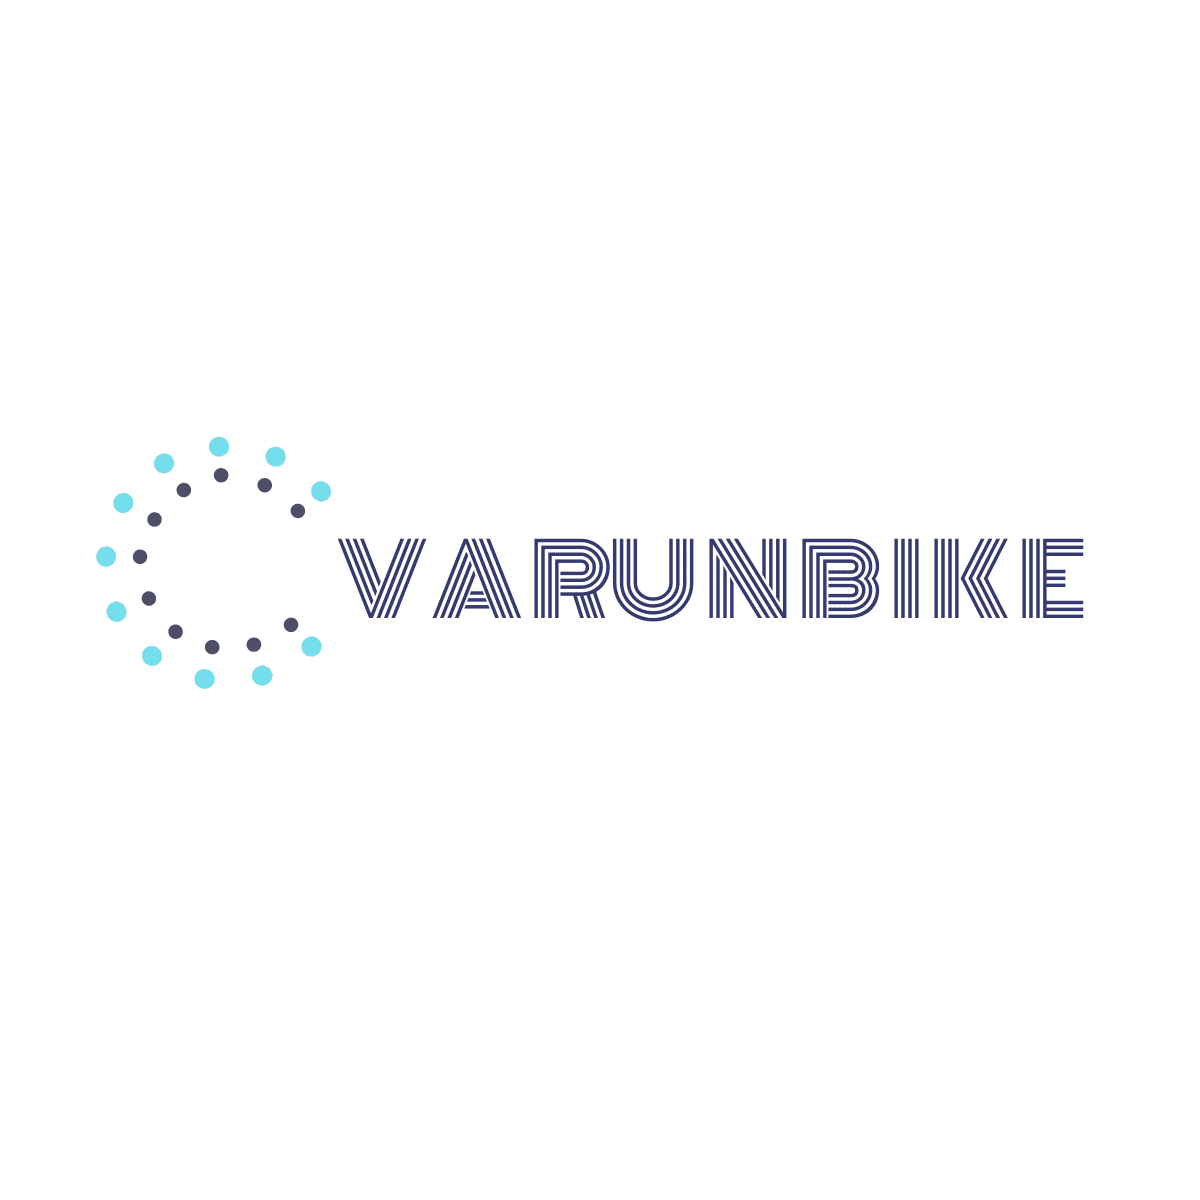 Many people may not have heard of Varun e-bikes. However, this doesn't mean that Varun e-bikes are unpopular.